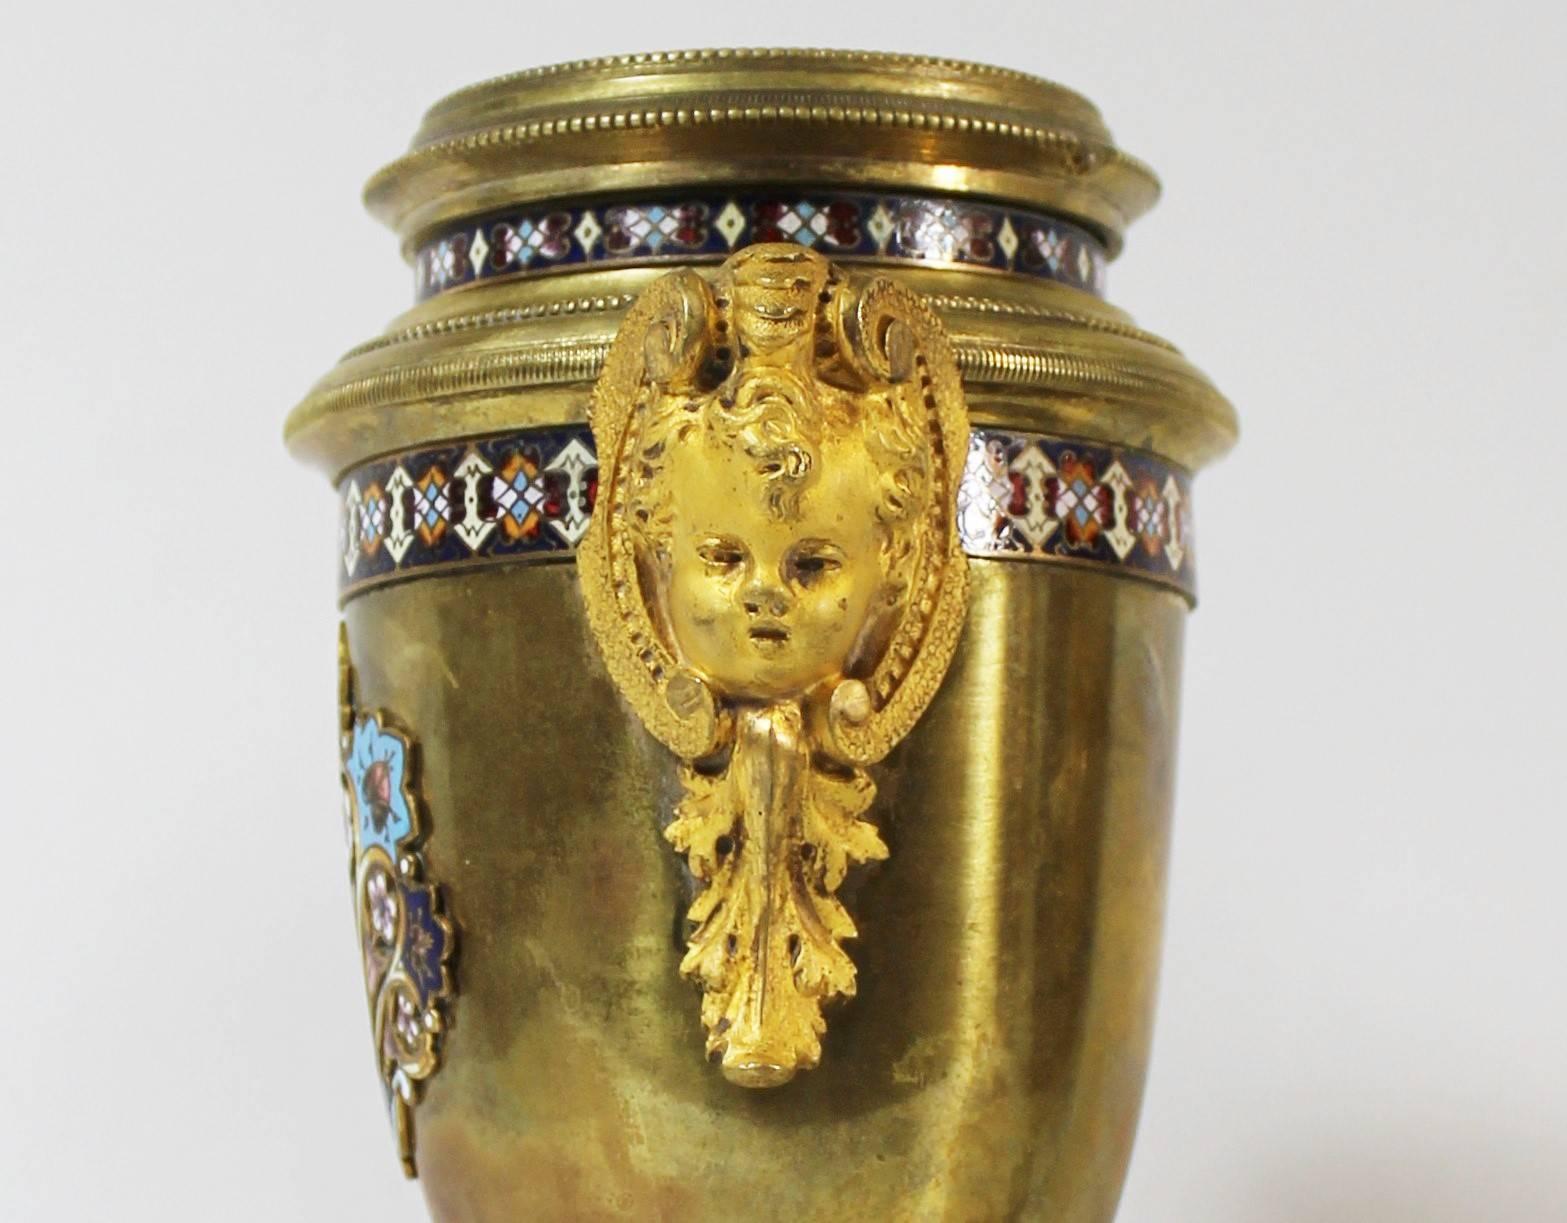  Pair of 19th Century French Gilt Bronze and Champleve Enamel Urns In Good Condition For Sale In Hamilton, Ontario